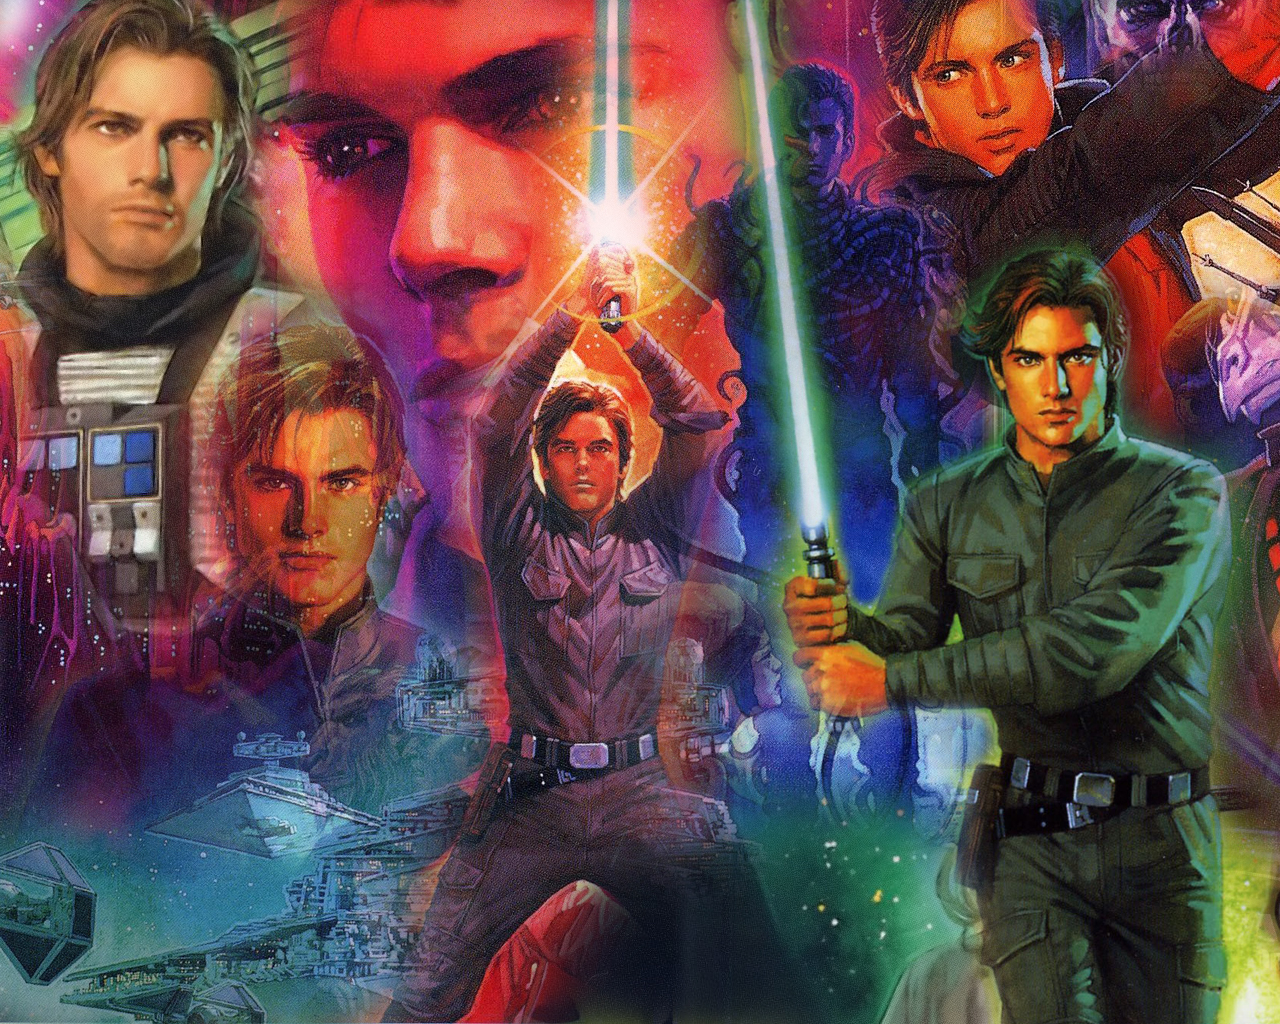 Jacen Solo is a fictional character in the Star Wars Expanded Universe. 